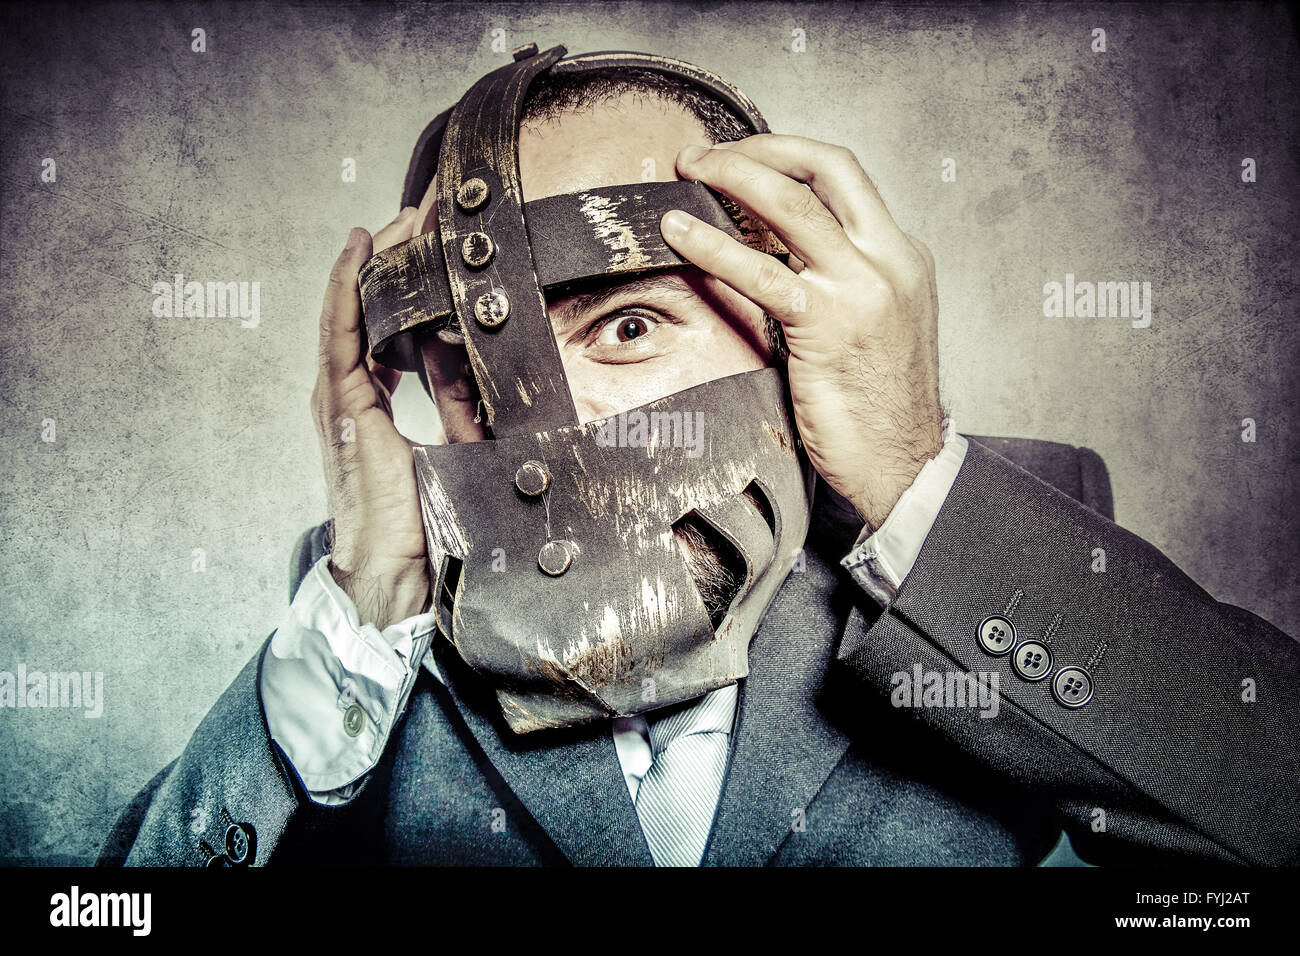 terror, business man with iron mask Stock Photo